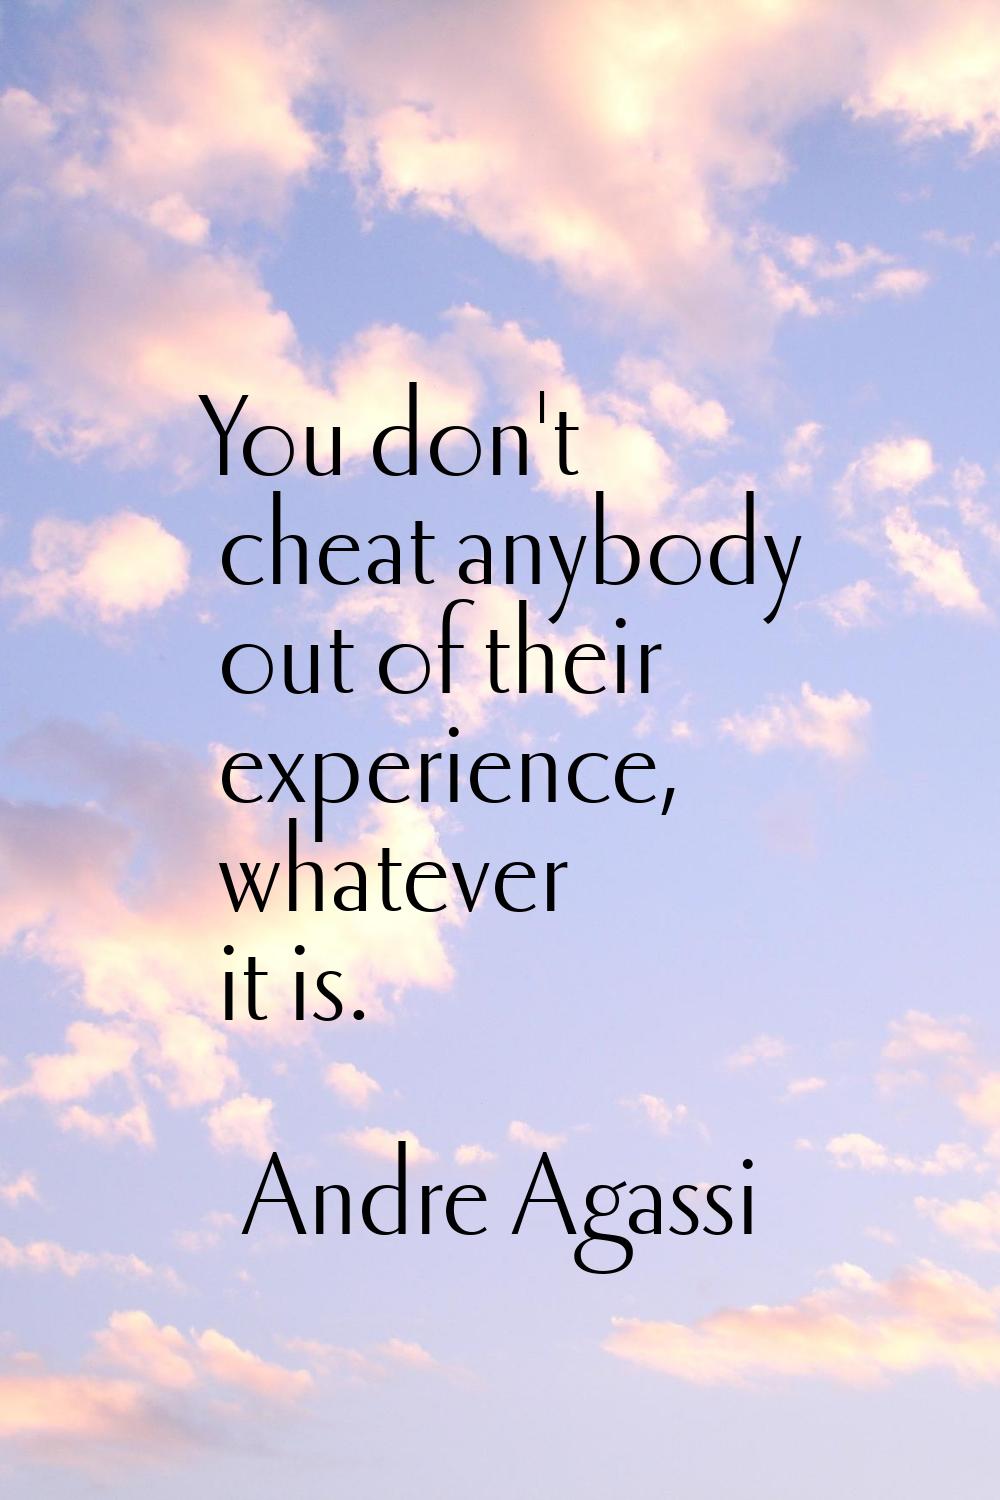 You don't cheat anybody out of their experience, whatever it is.